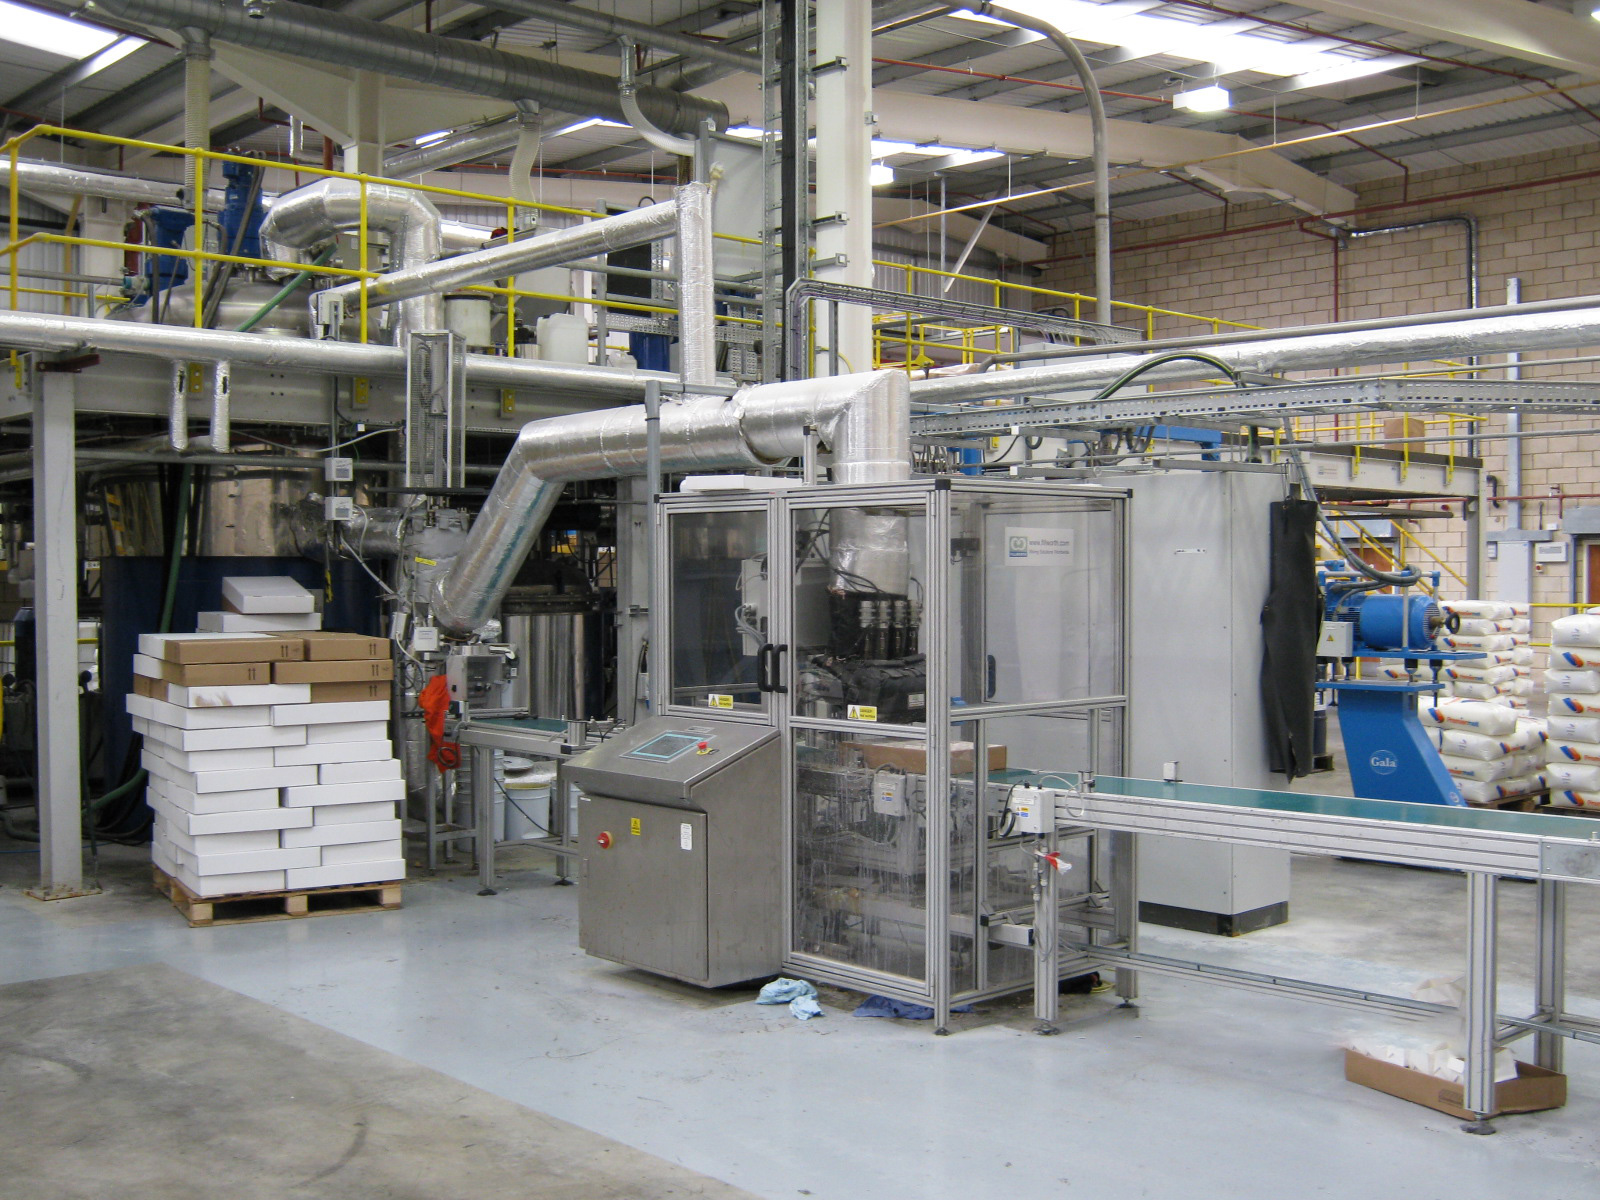 Product filling line